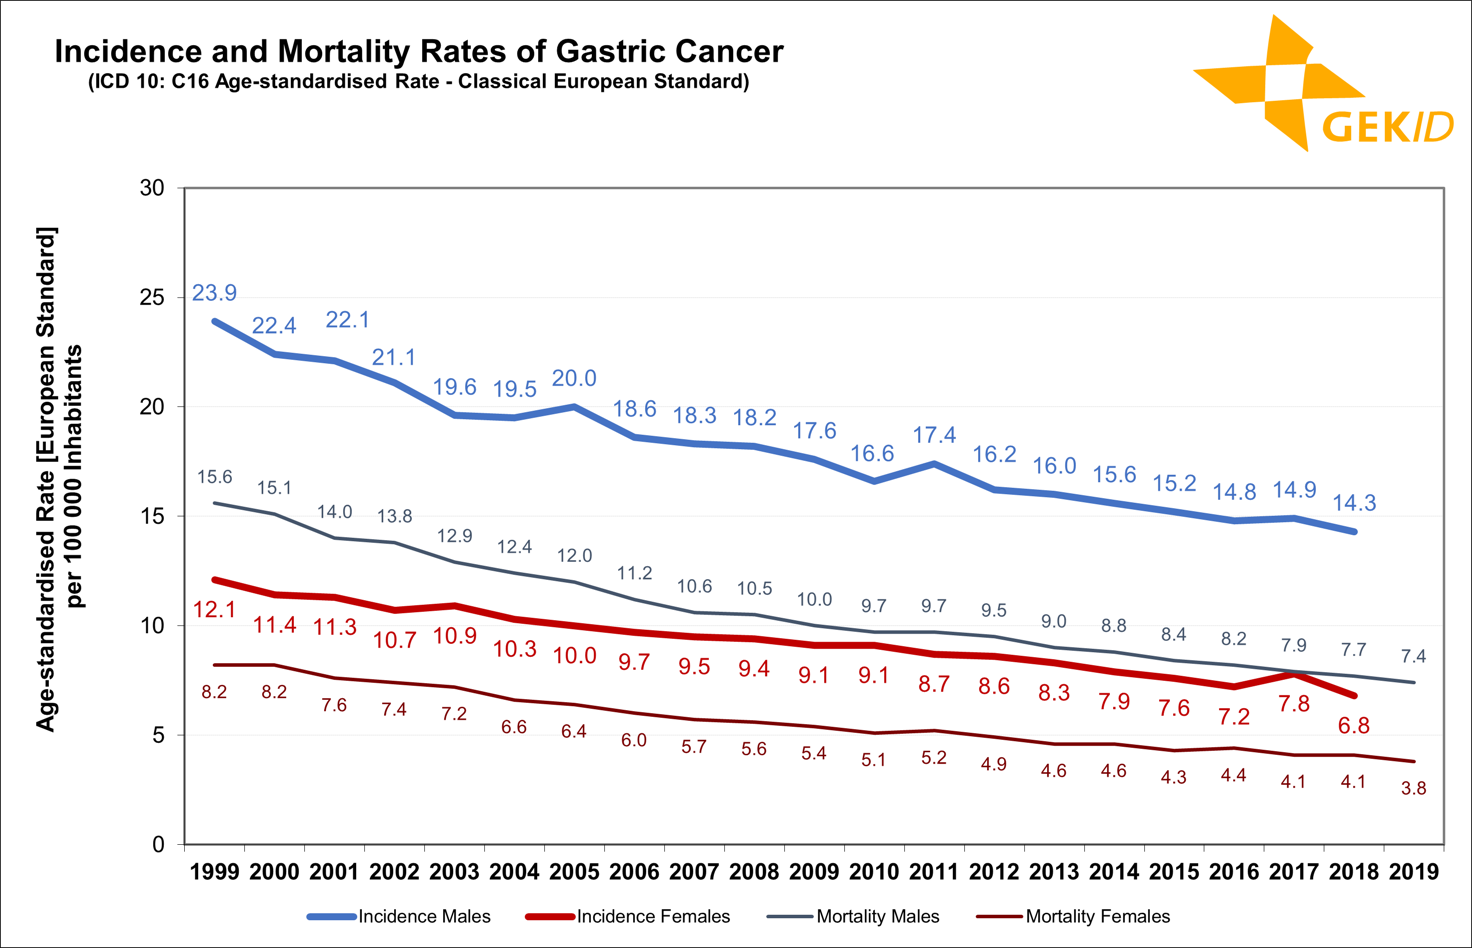 Estimated incidence of gastric cancer (ICD 10: C16) in Germany - age-standardized rates (old European standard) 1.